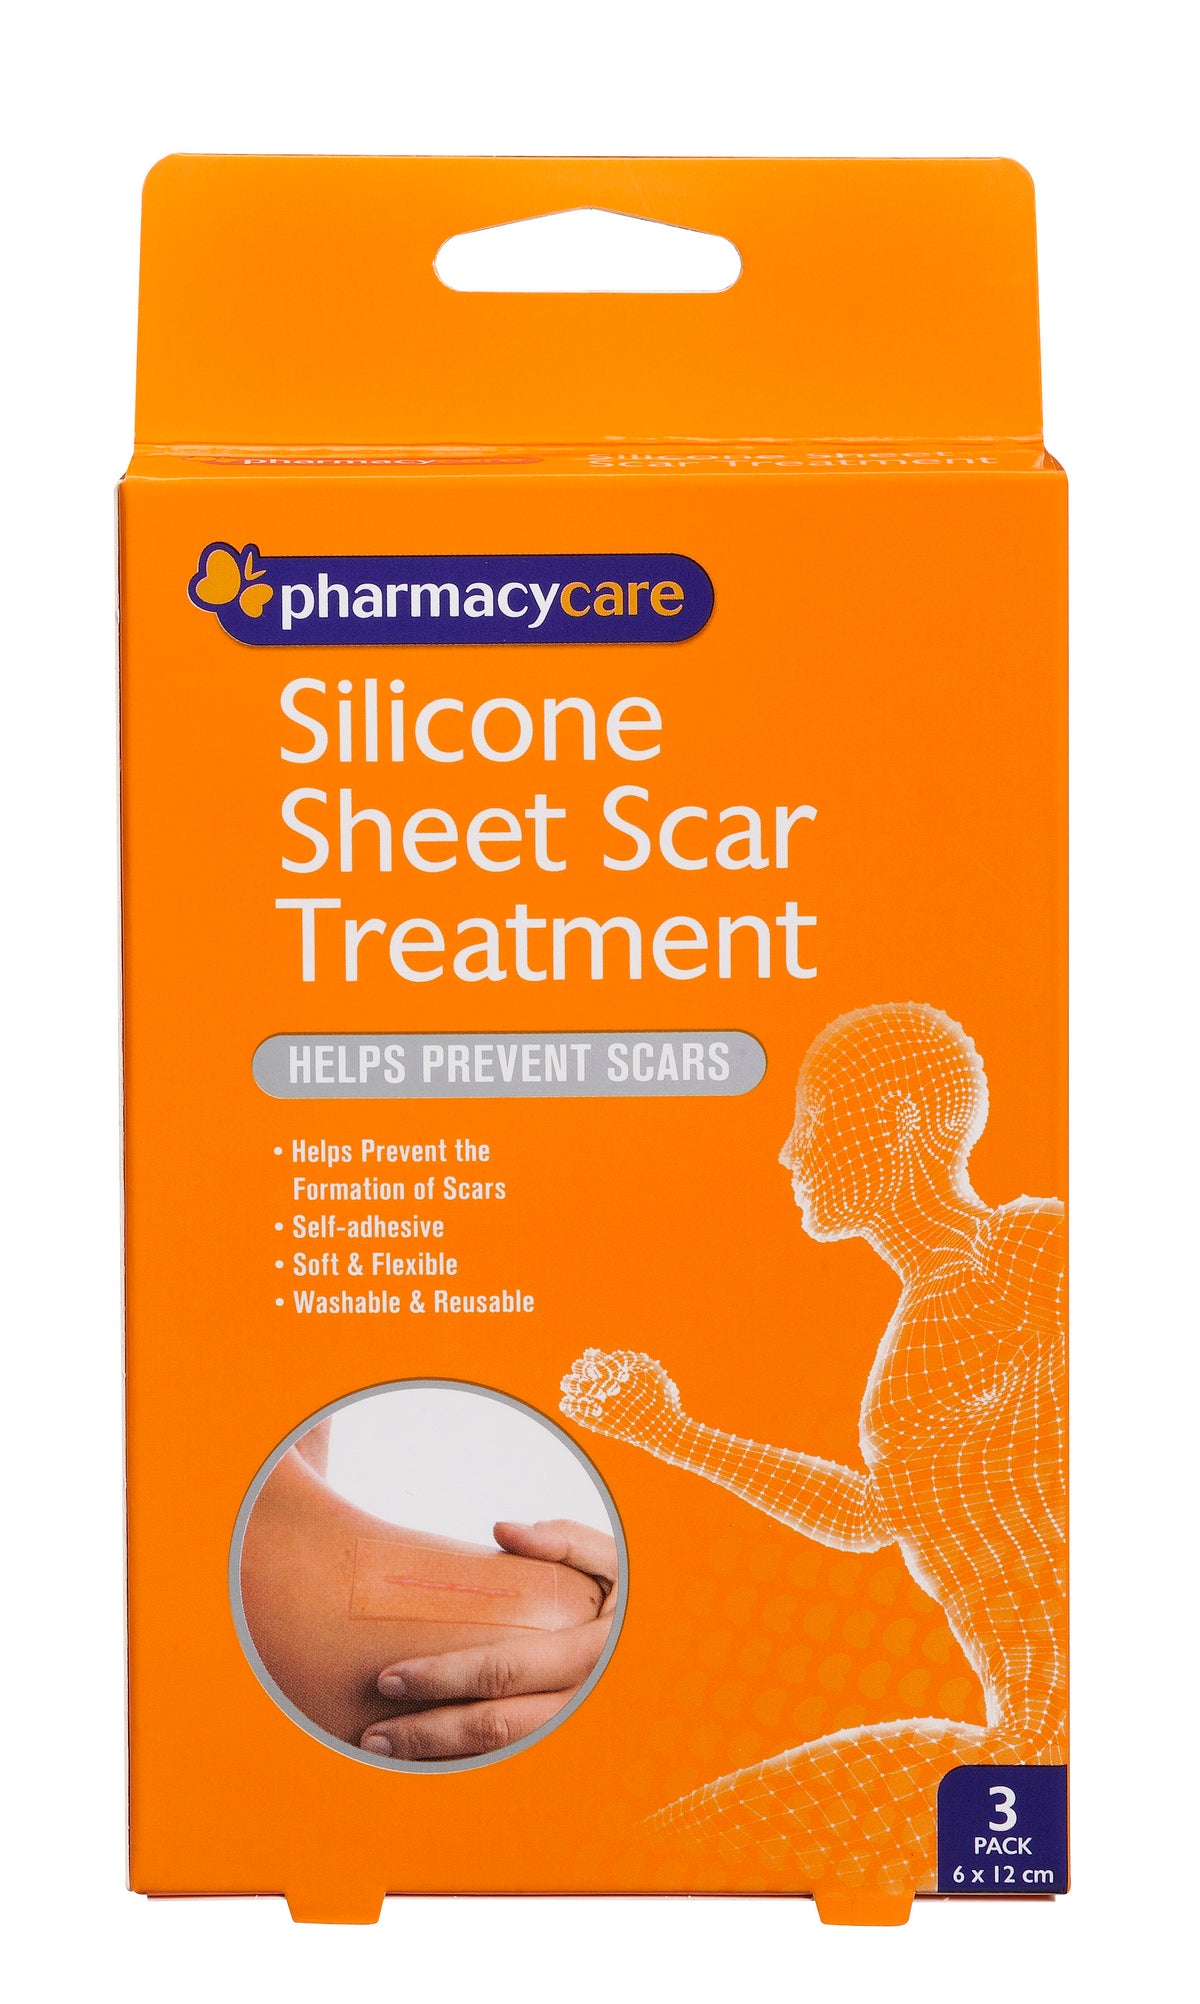 Pharmacy Care Silicone Sheet Scar Treatment pack 3